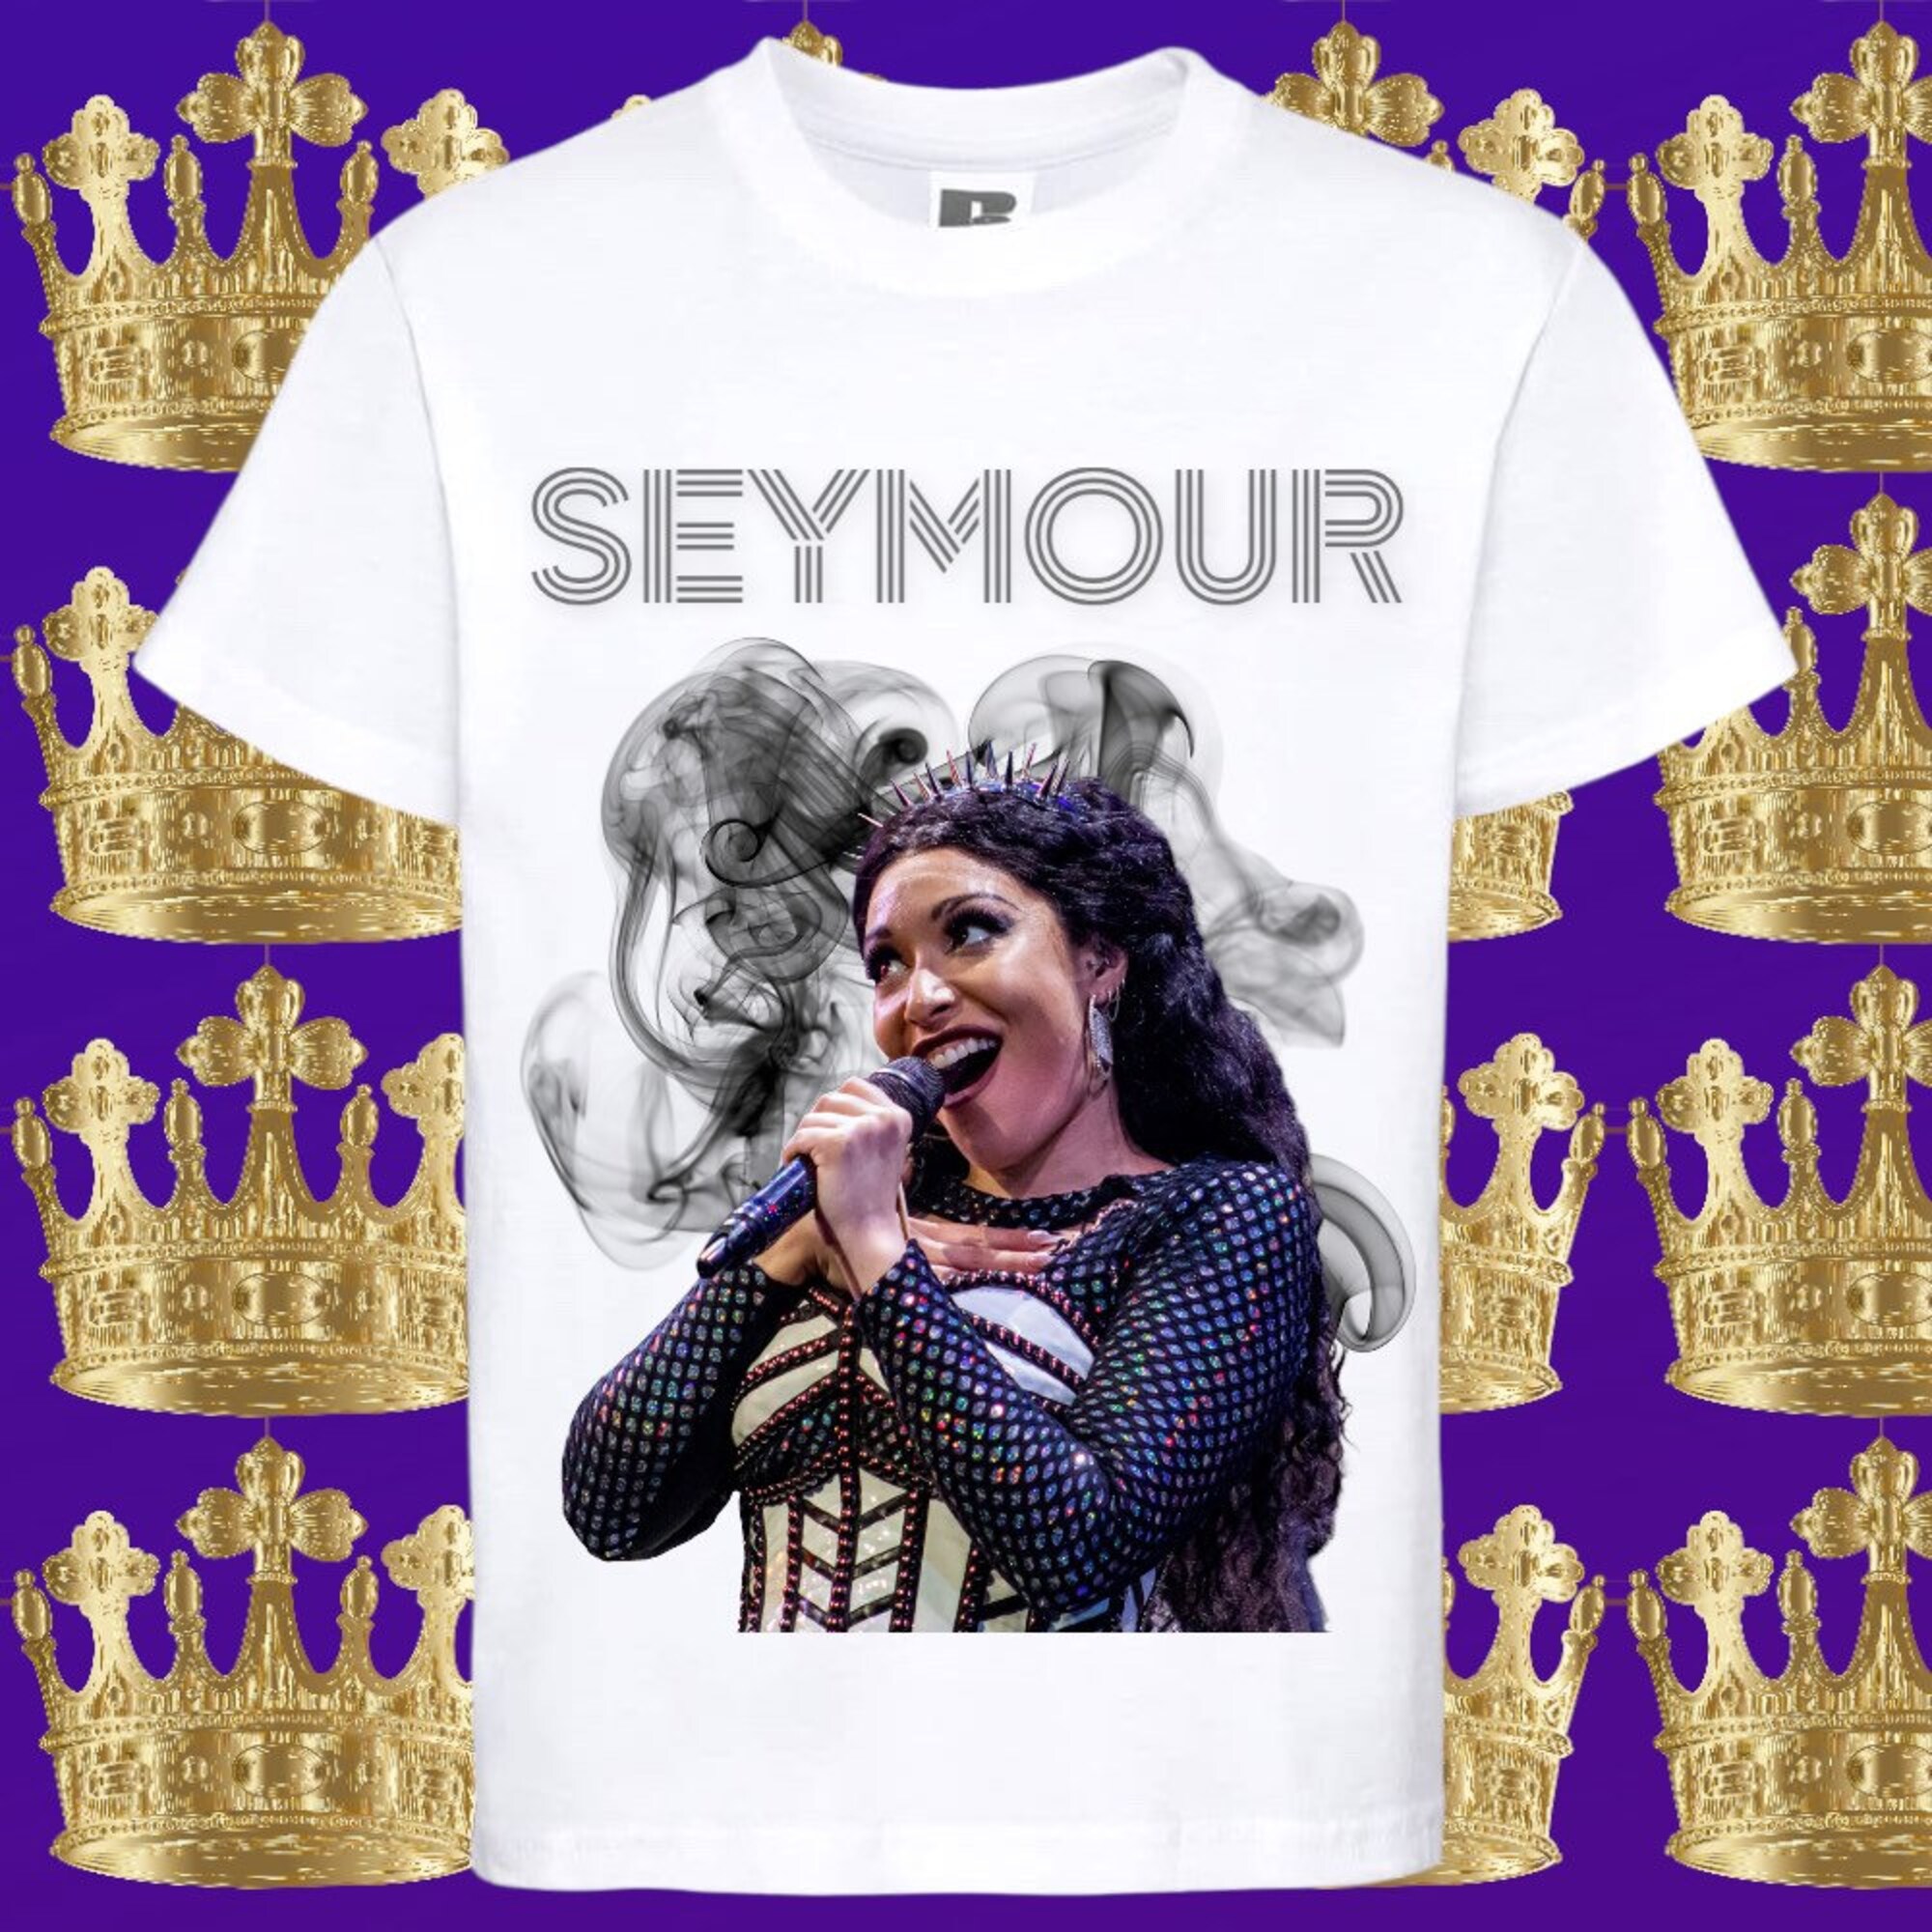 Discover Seymour Six the Musical Tee